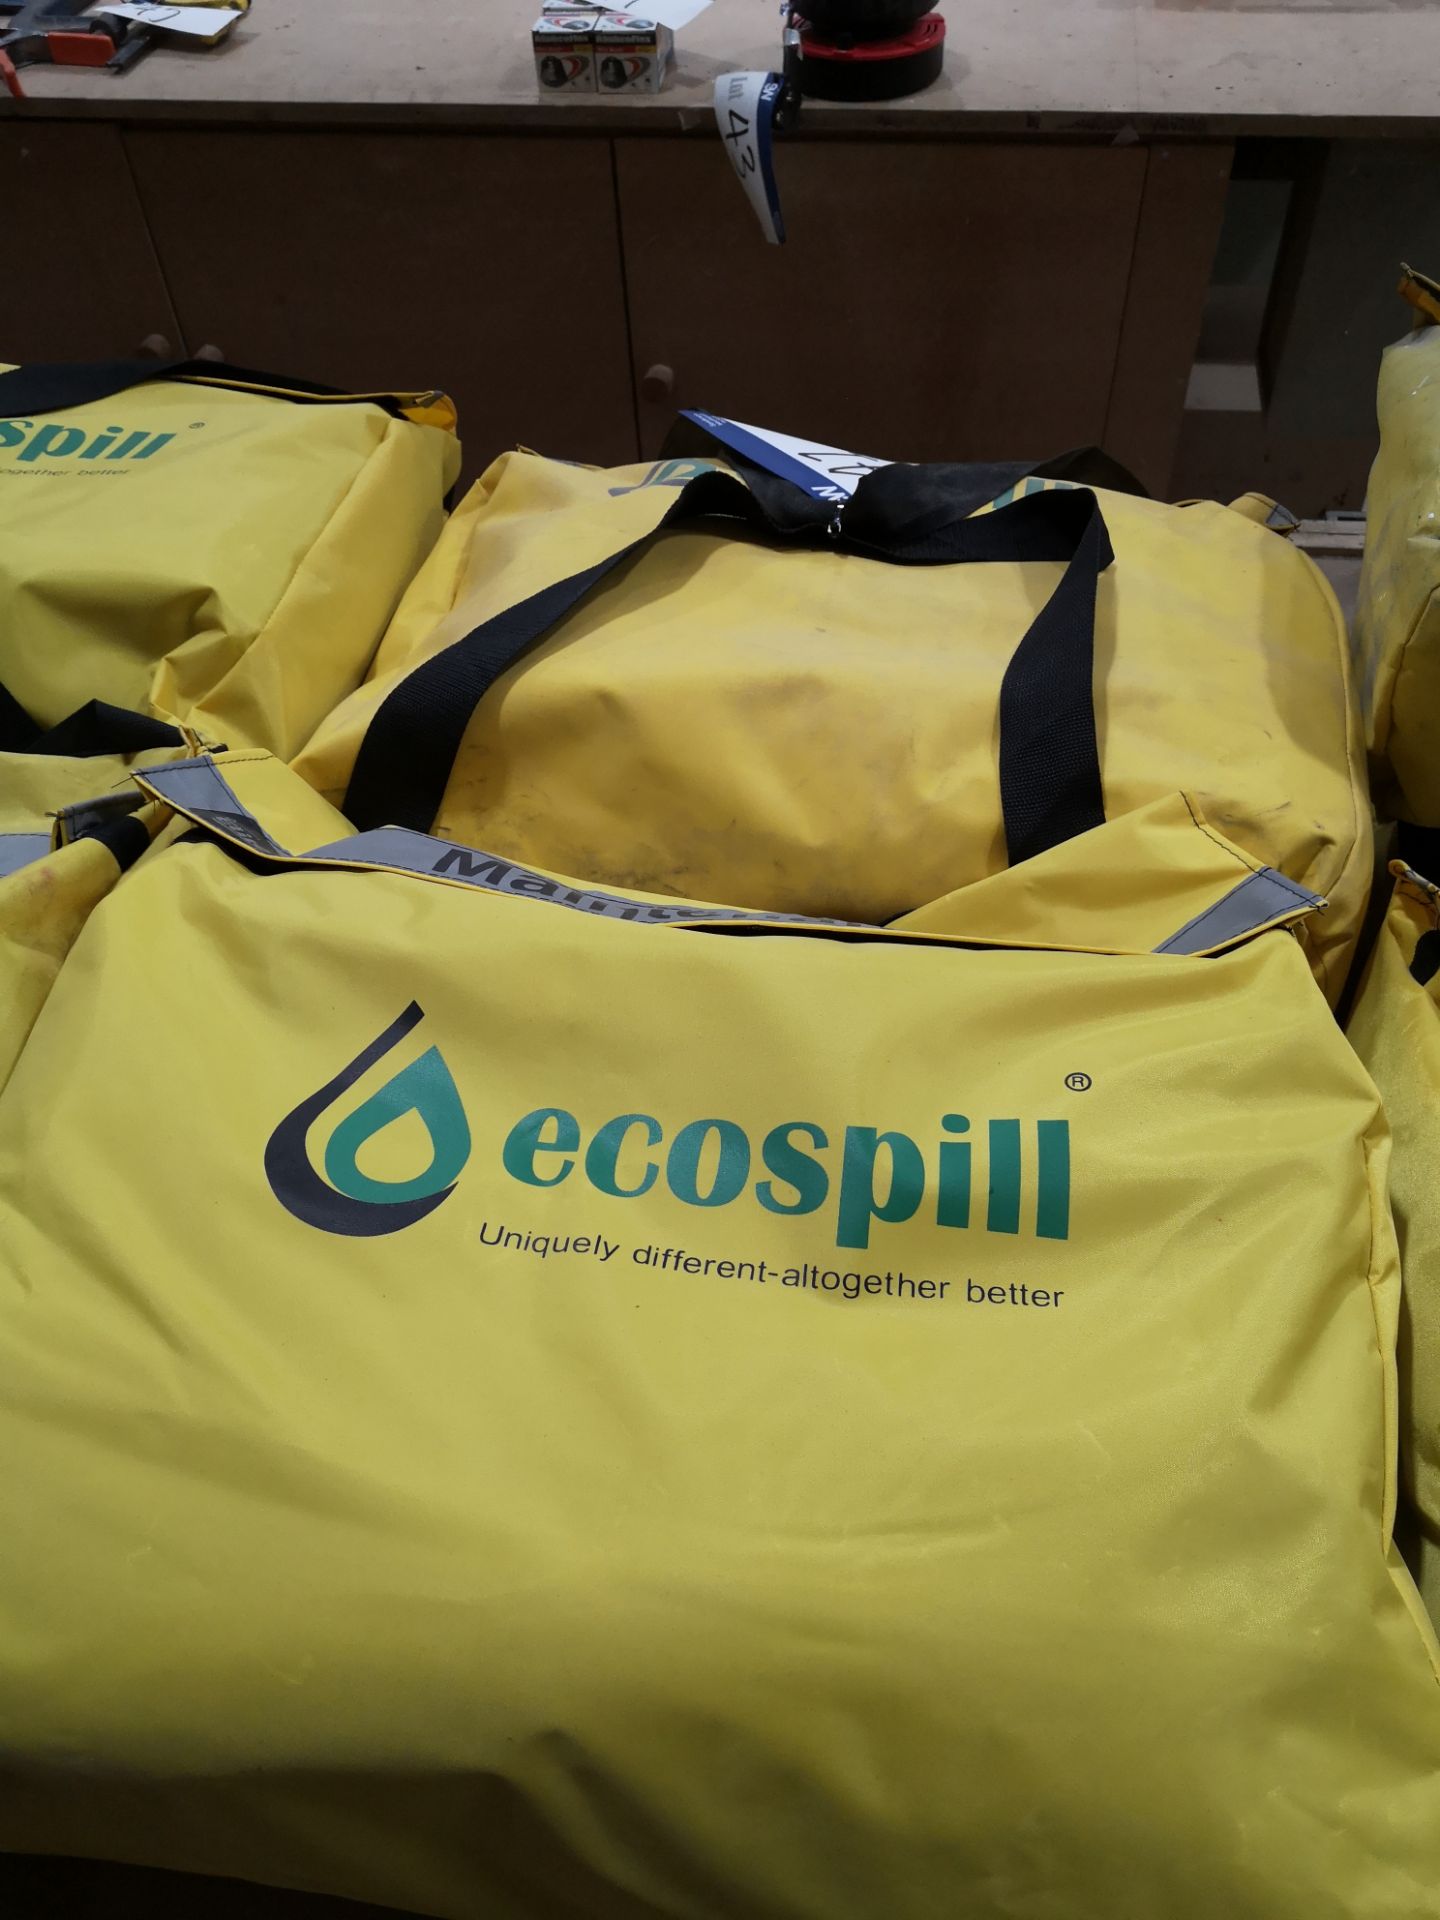 Two Ecospill Spill Kits (LOT LOCATED AT 8 WHITEHOU